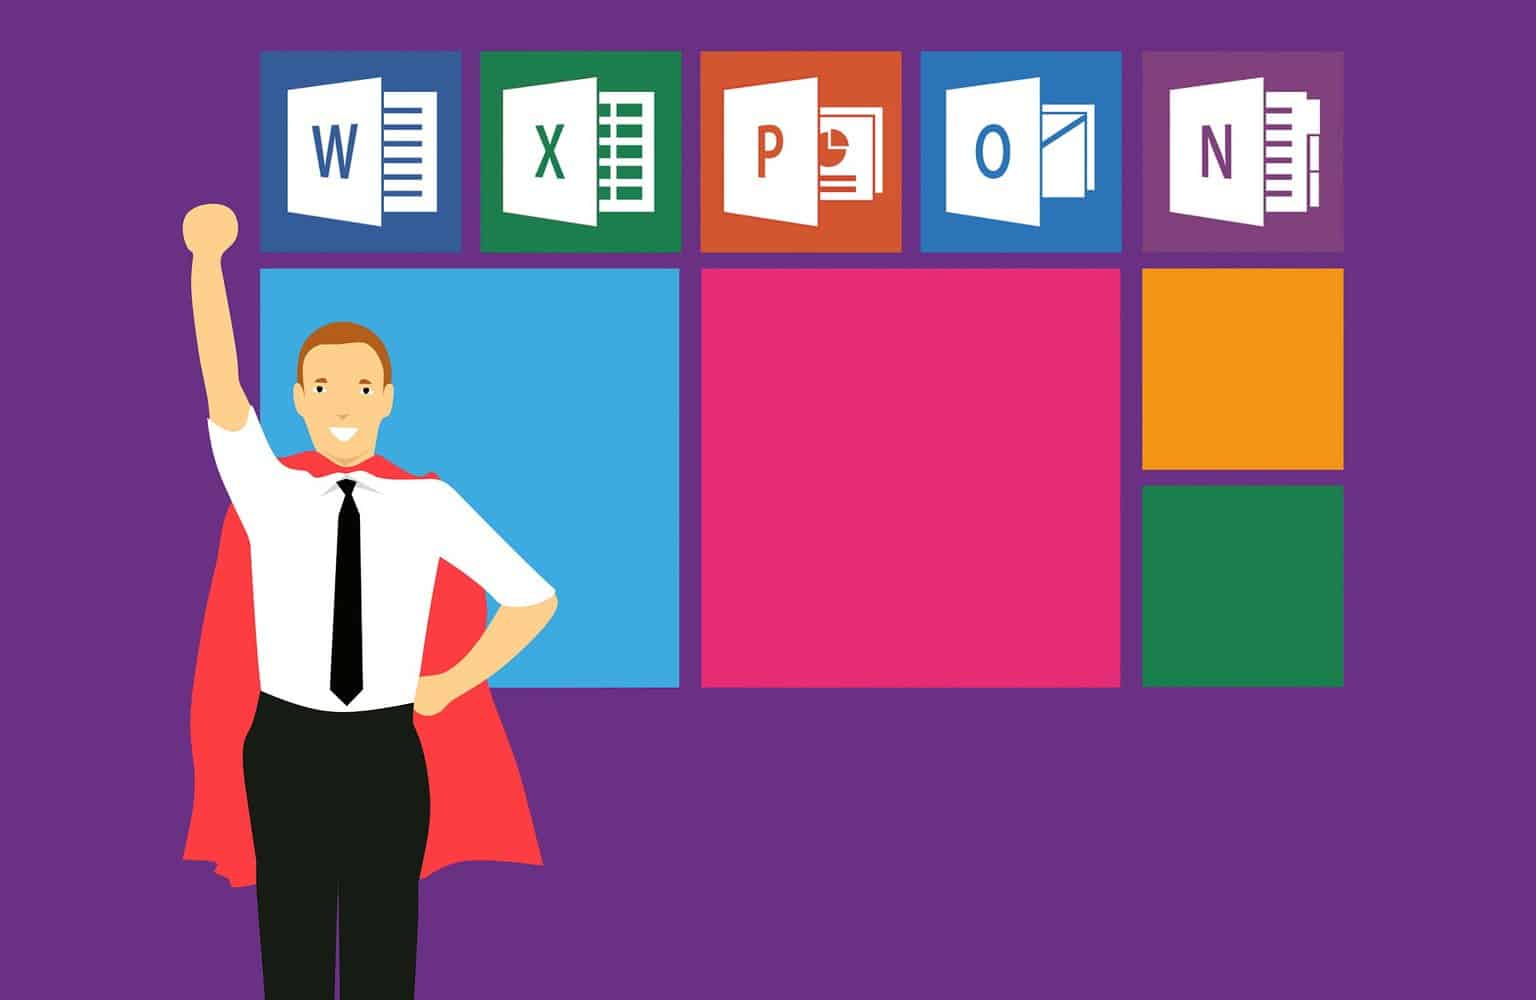 Microsoft office icons including excel